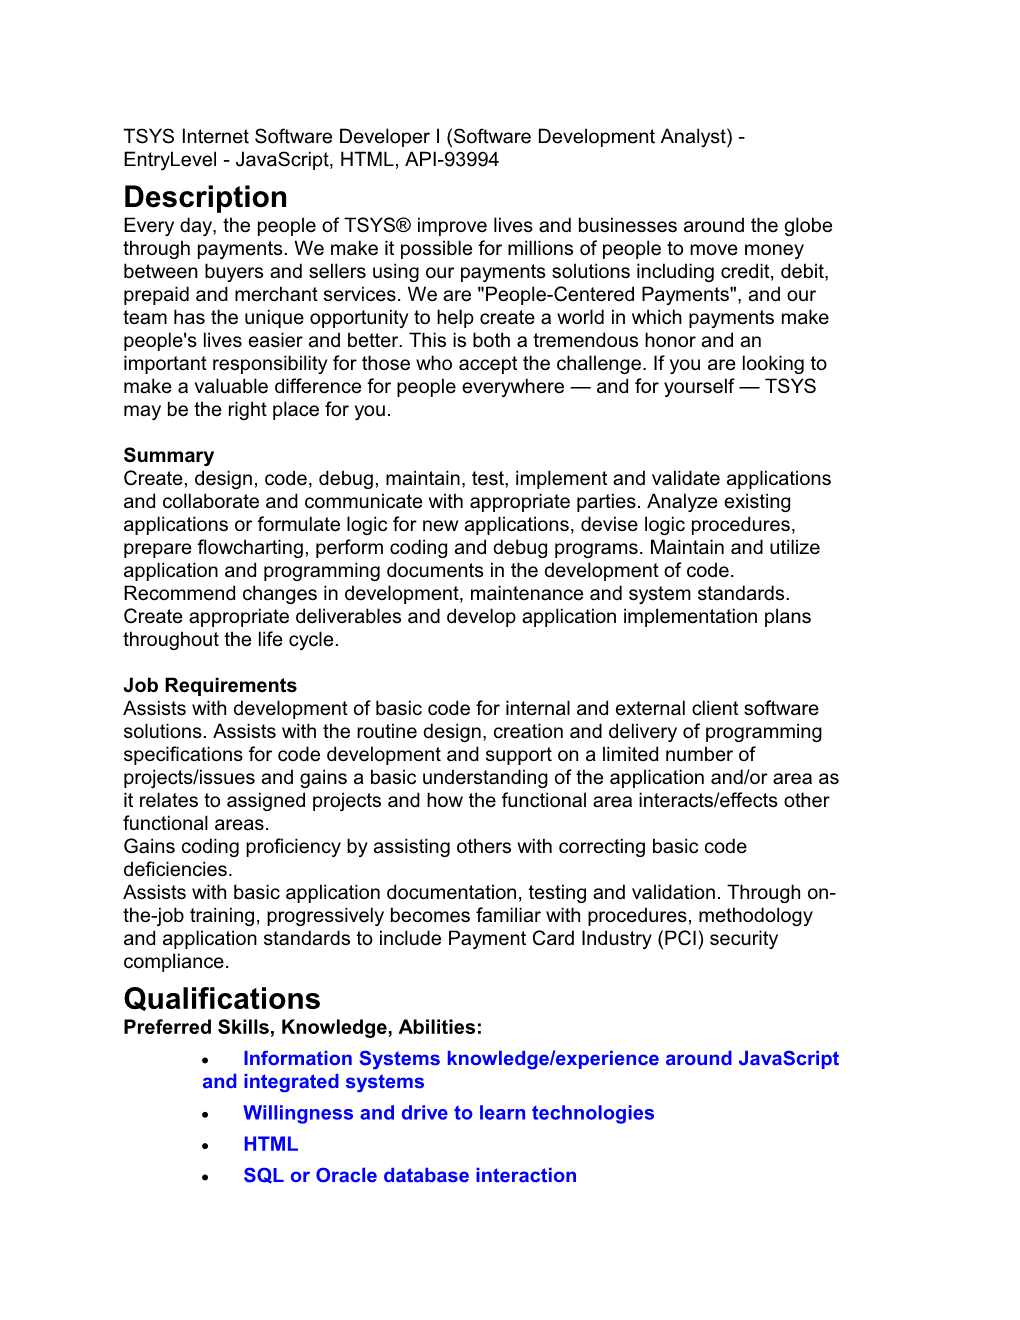 Information Systems Knowledge/Experience Around Javascript and Integrated Systems